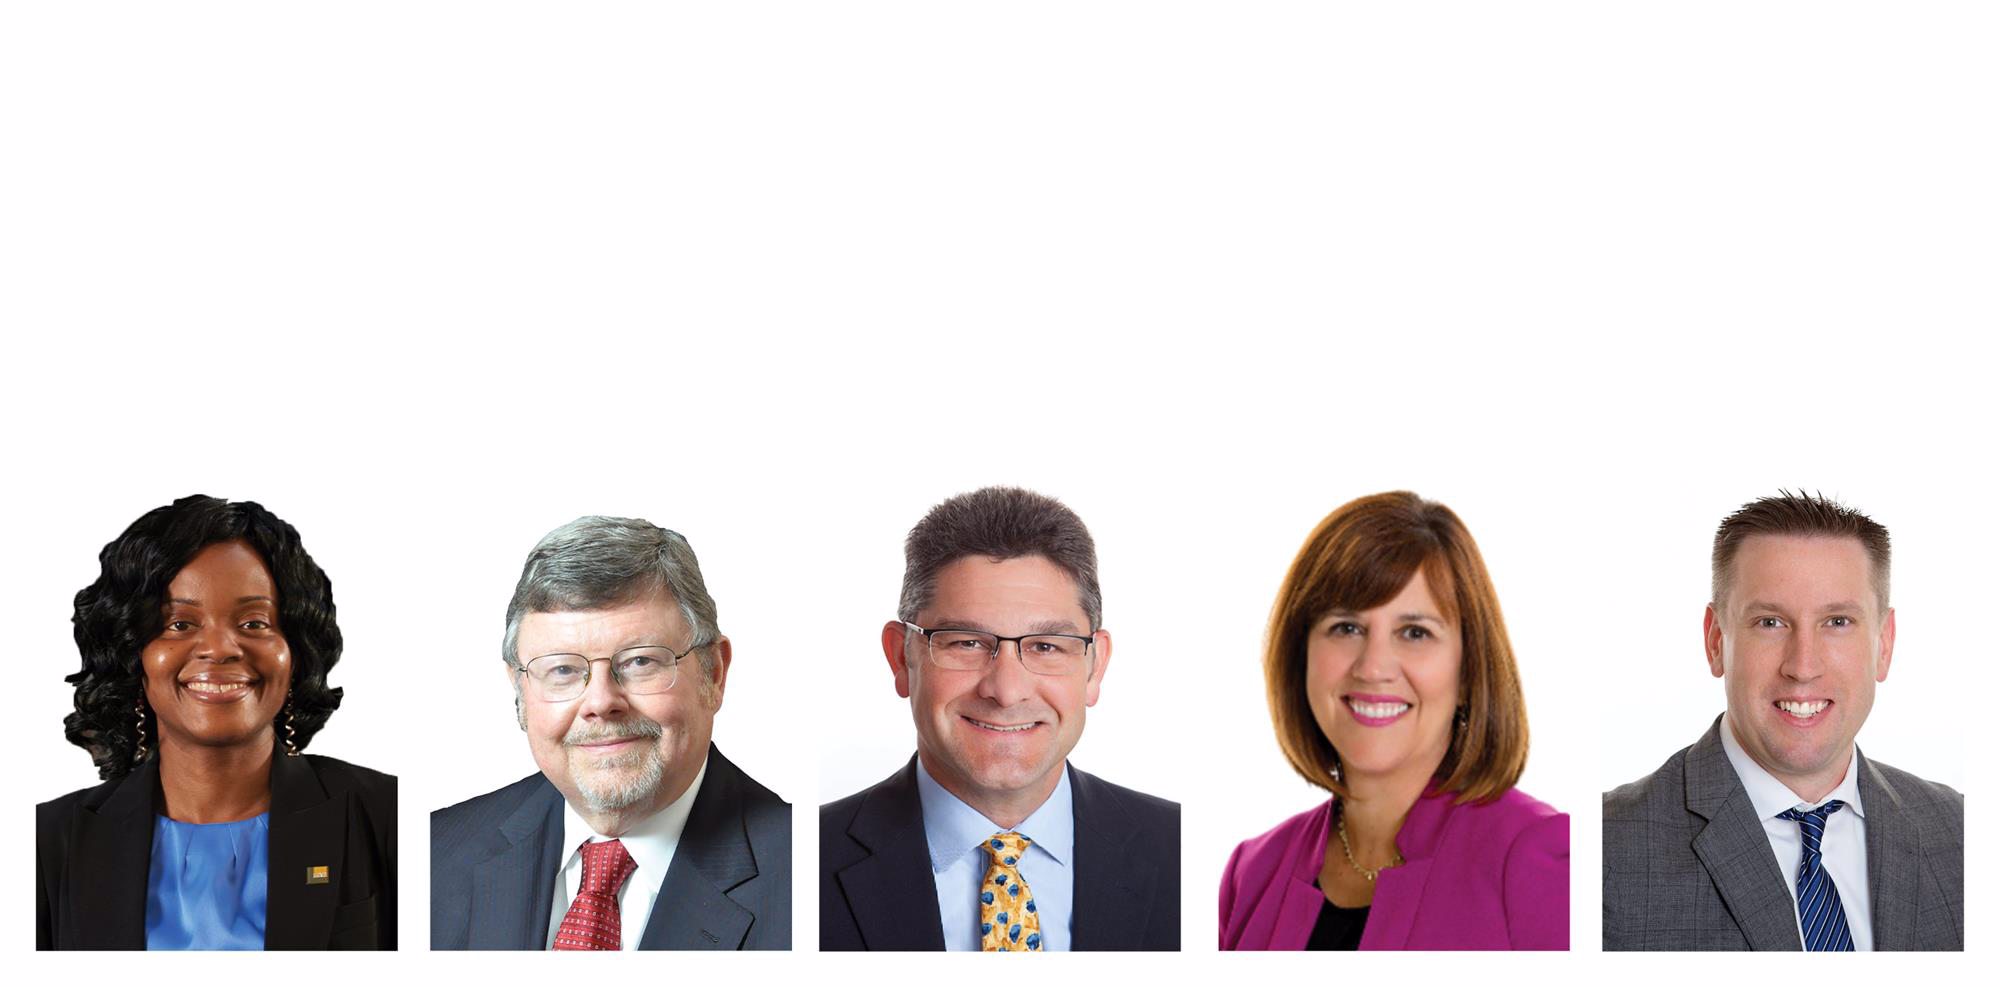 Evangelical Community Hospital Announces Board of Directors New and Returning Appointments